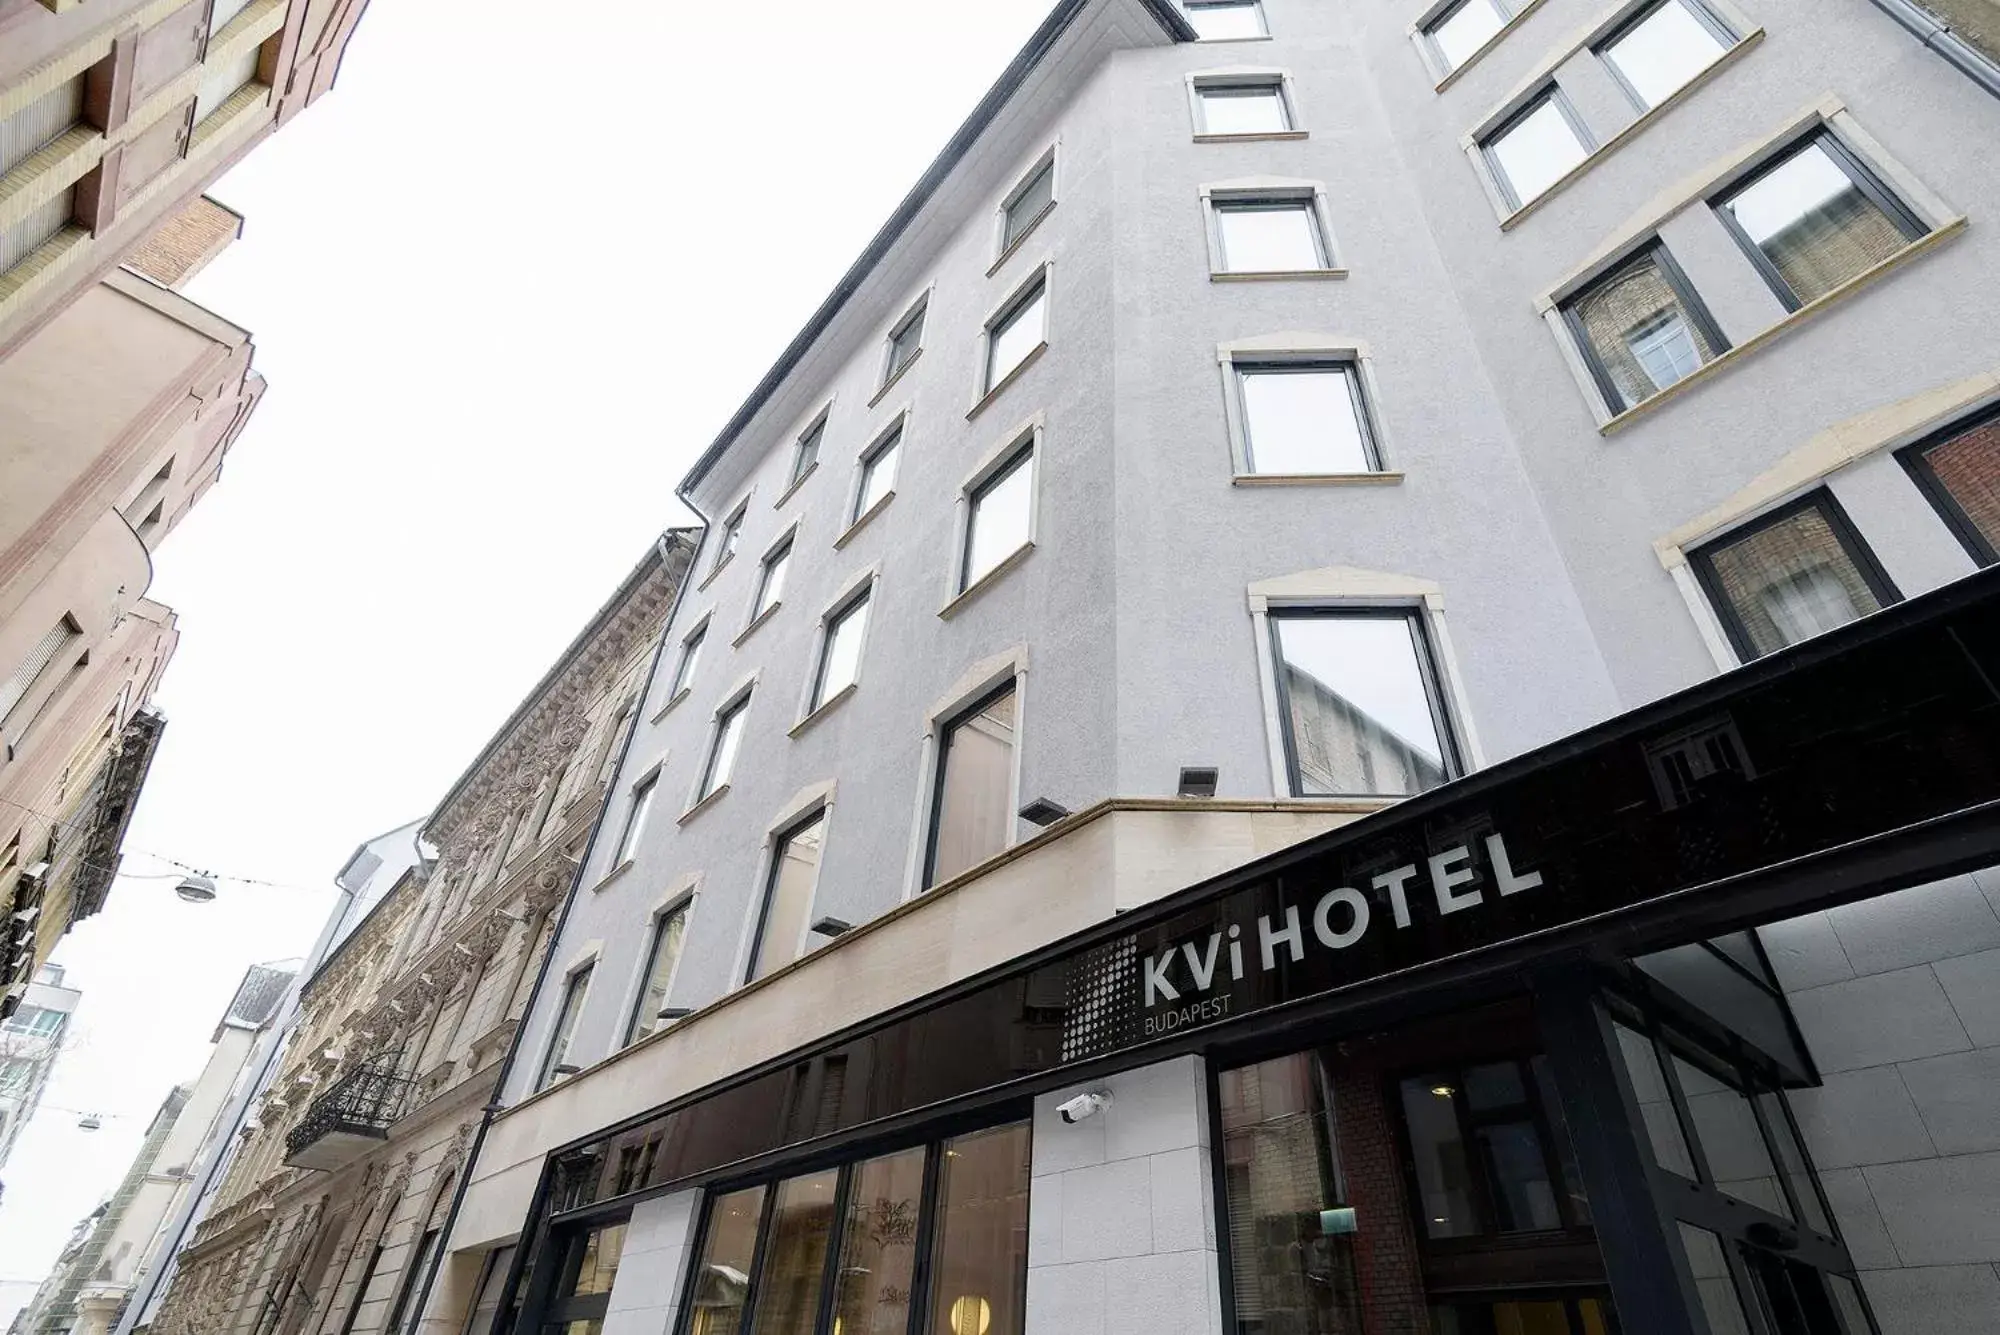 Property Building in KViHotel Budapest - the smart hotel